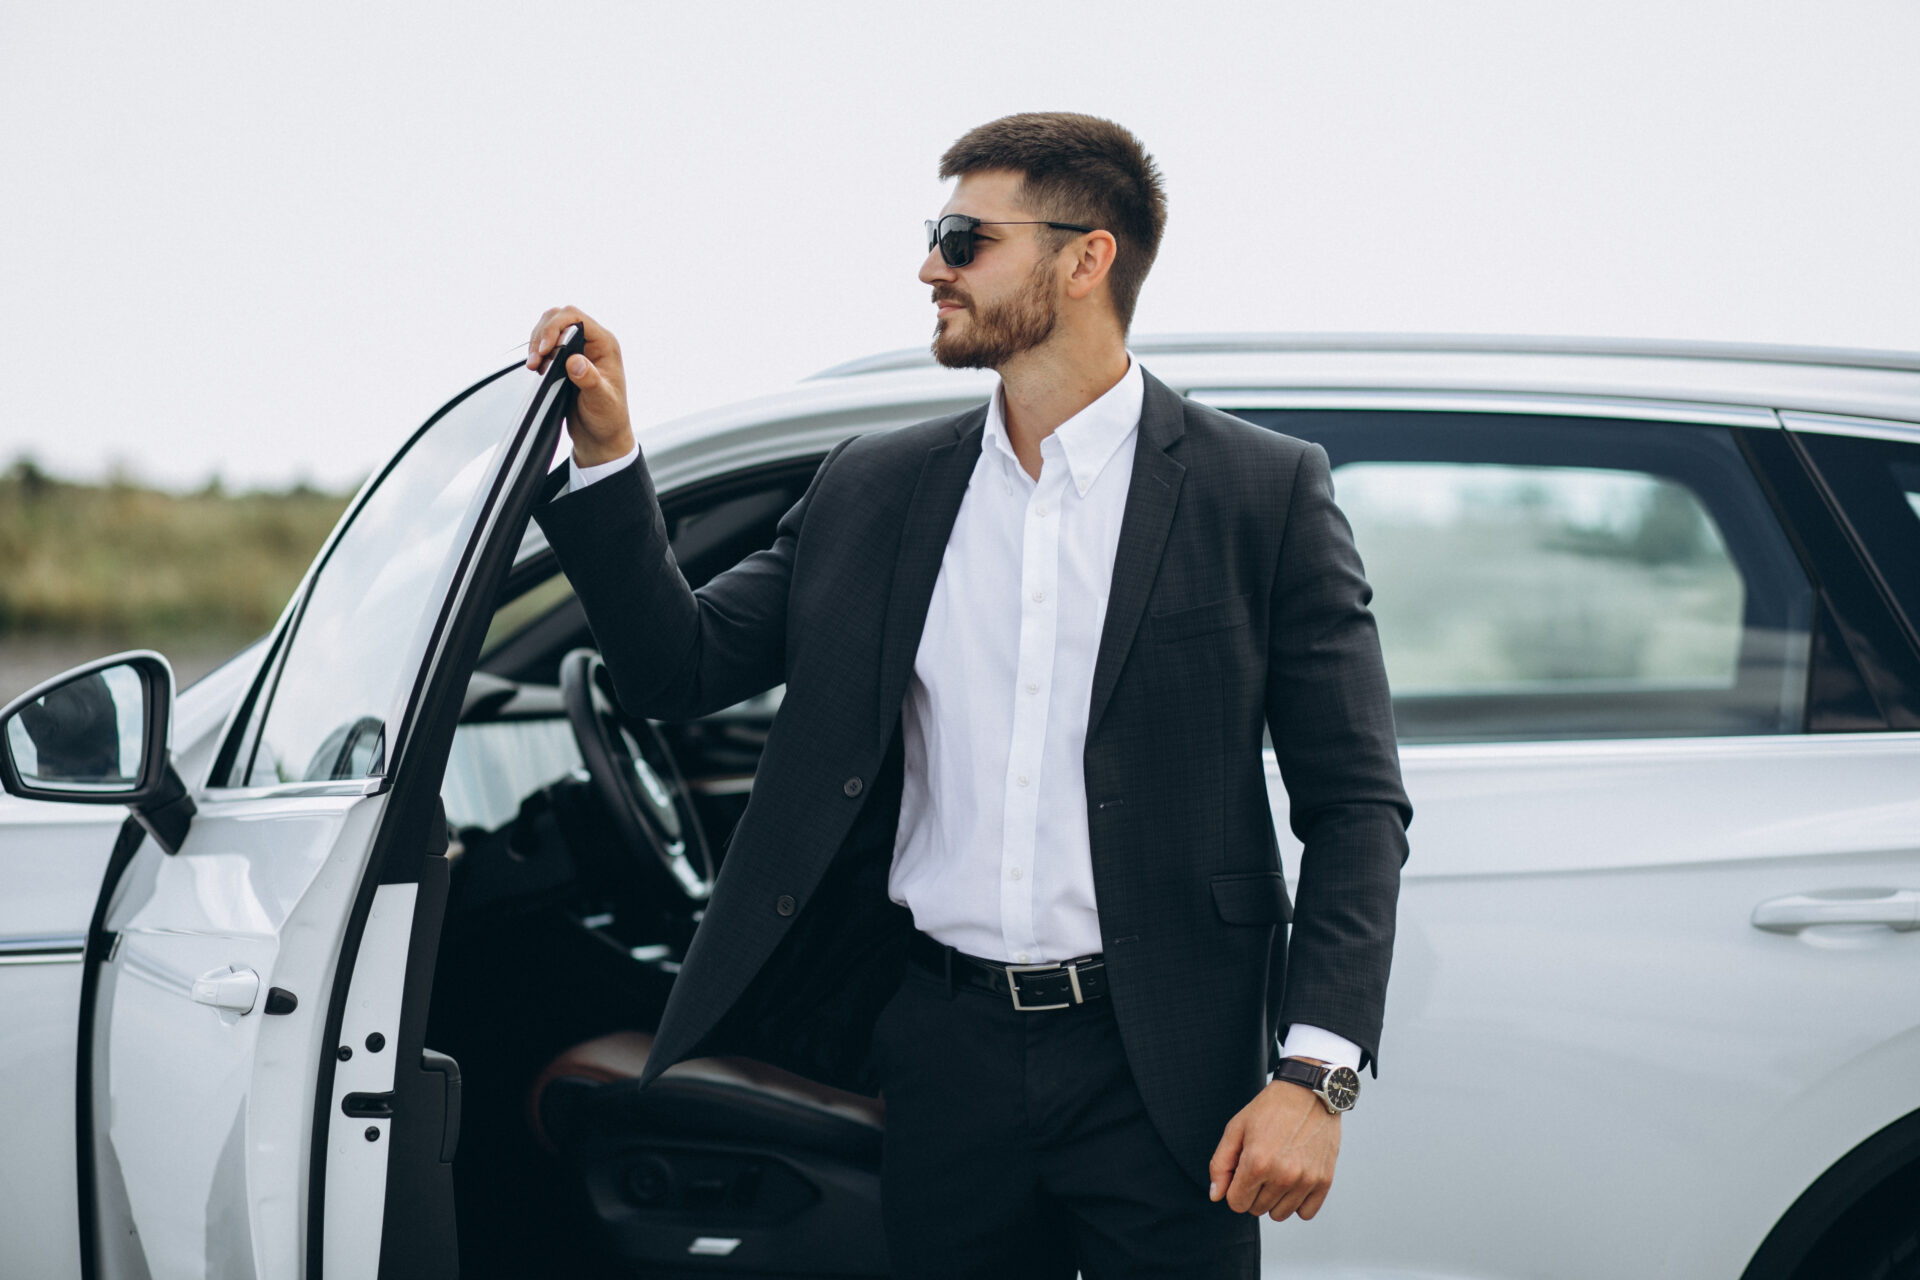 Handsome business man by the white car